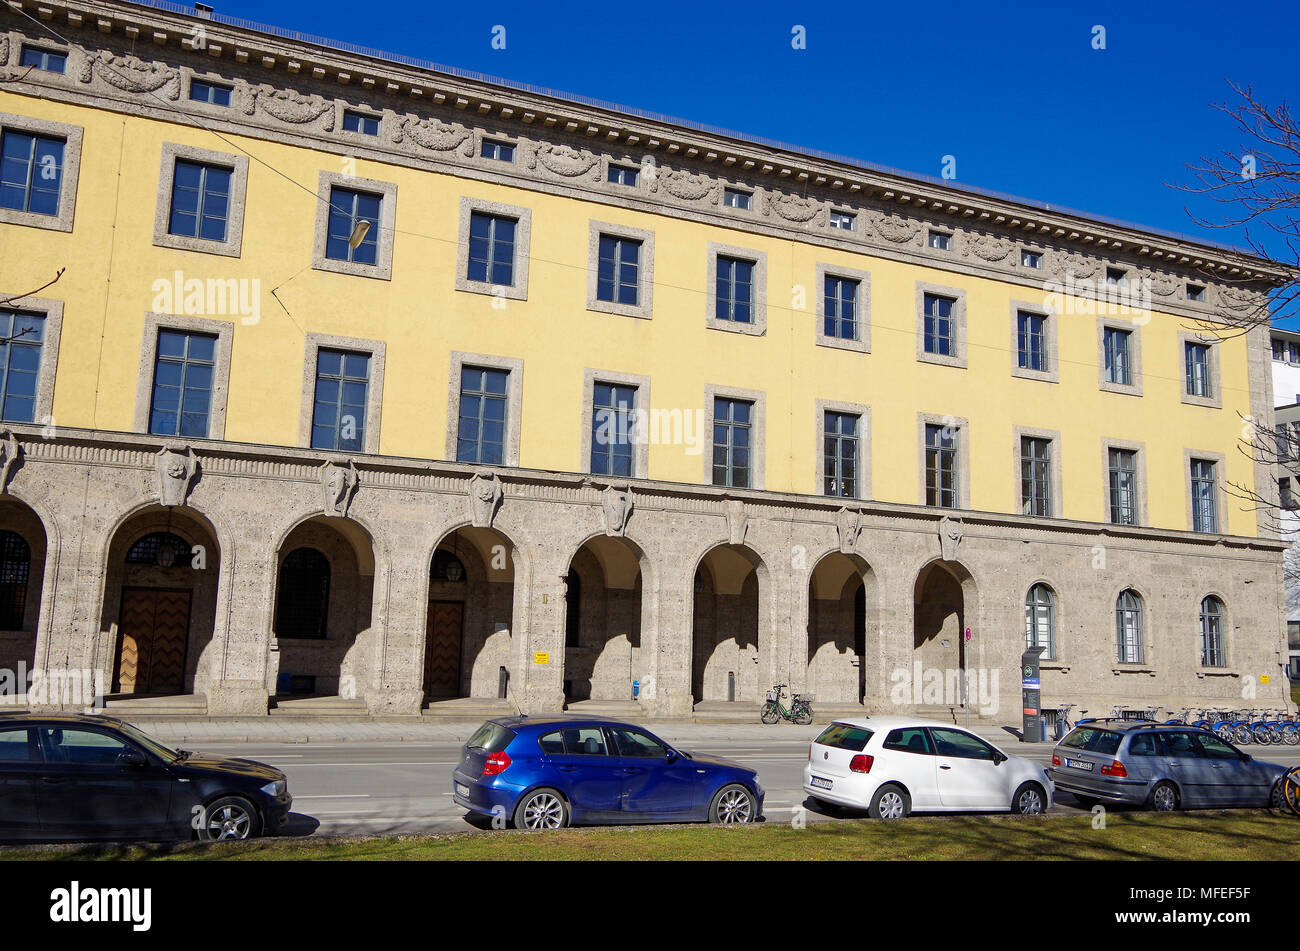 Part of the main administrative building of the Technical University of Munich, built in a historicist style Stock Photo